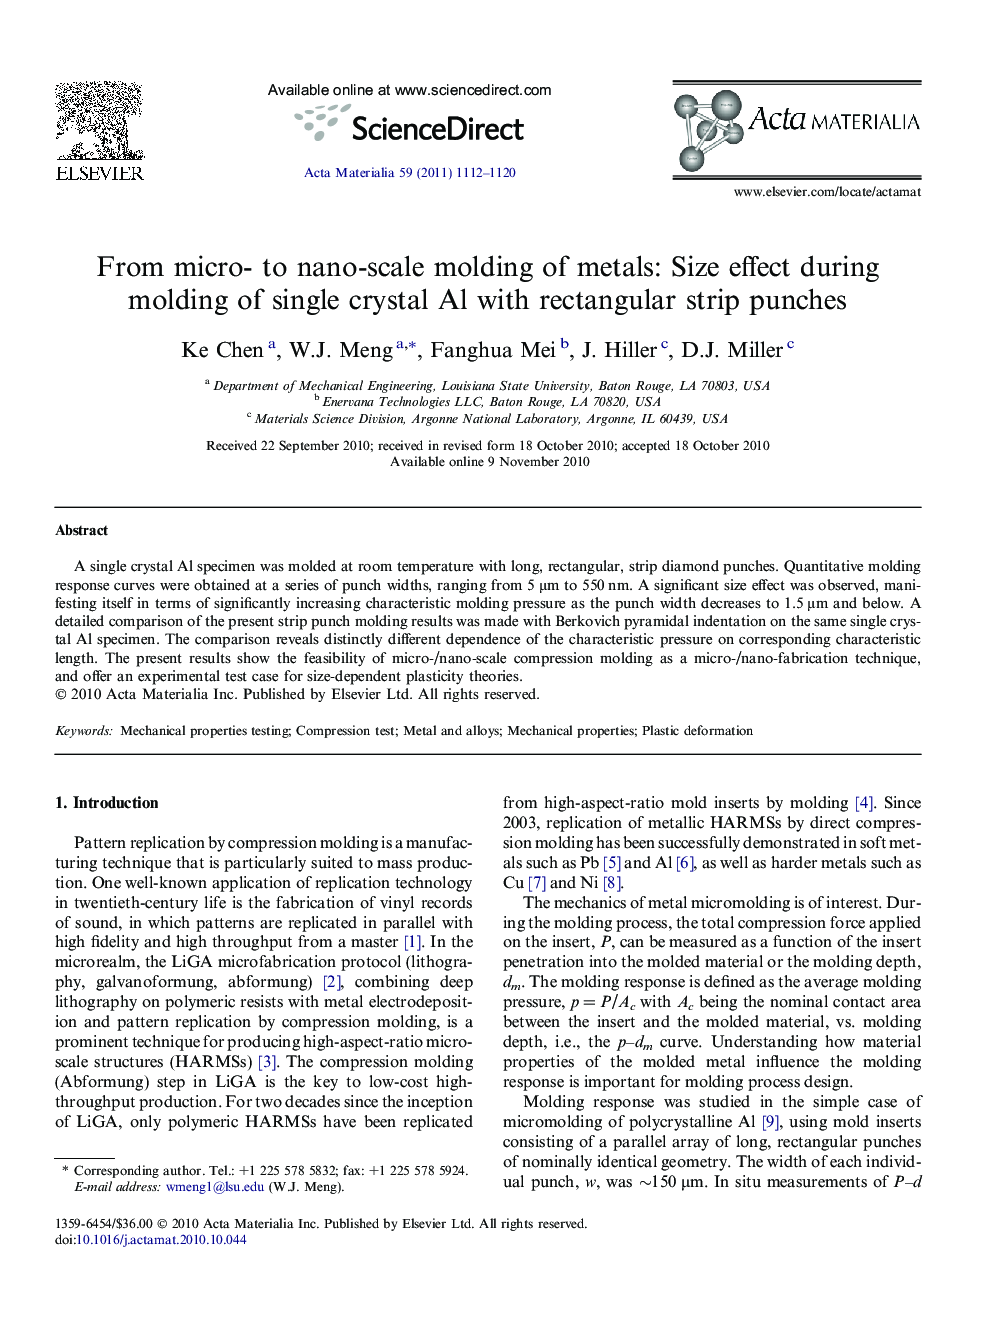 From micro- to nano-scale molding of metals: Size effect during molding of single crystal Al with rectangular strip punches